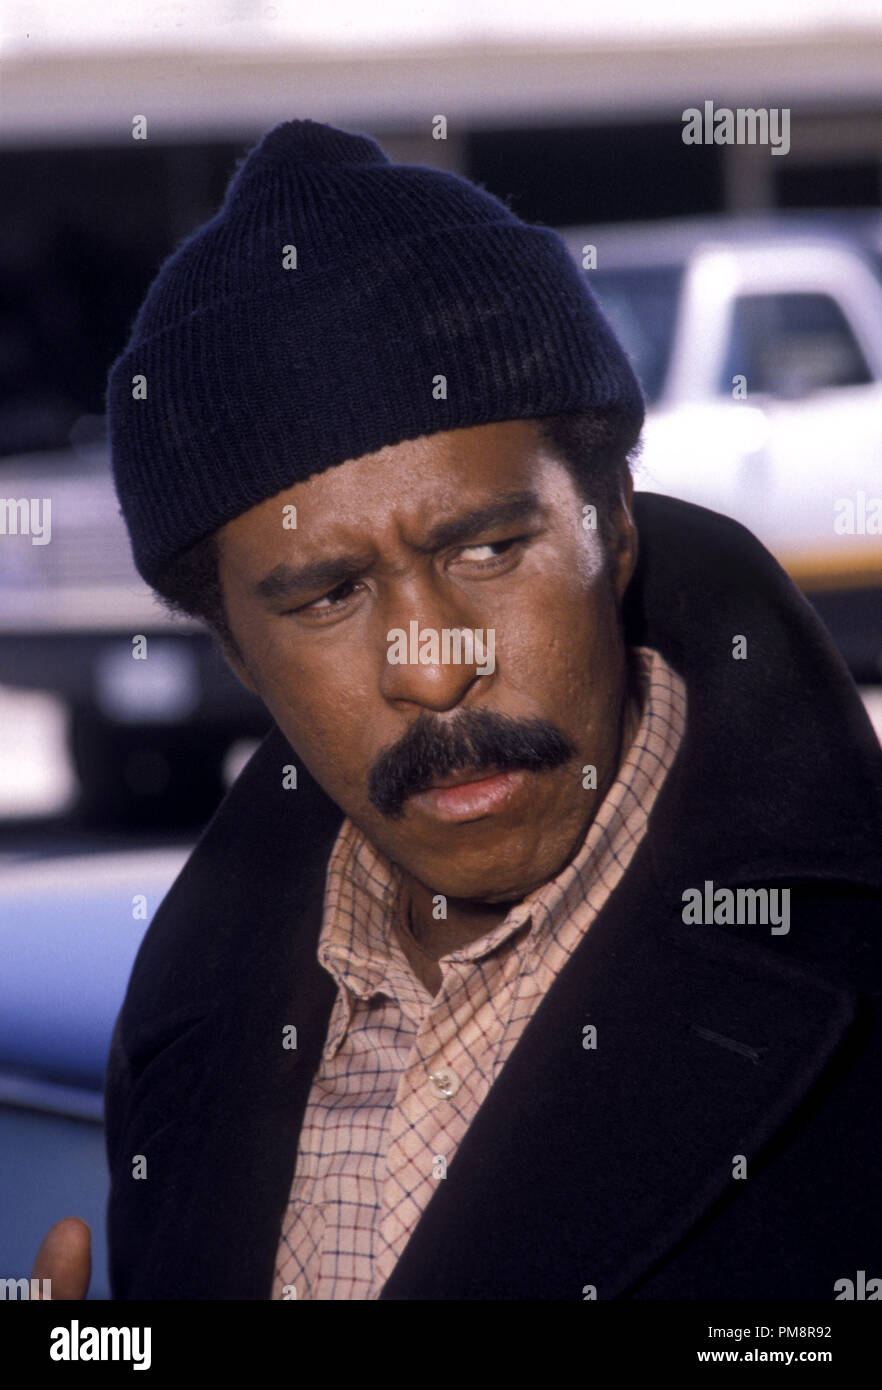 Studio Publicity Still from 'Bustin' Loose' Richard Pryor © 1981 Universal  All Rights Reserved   File Reference # 31713180THA  For Editorial Use Only Stock Photo